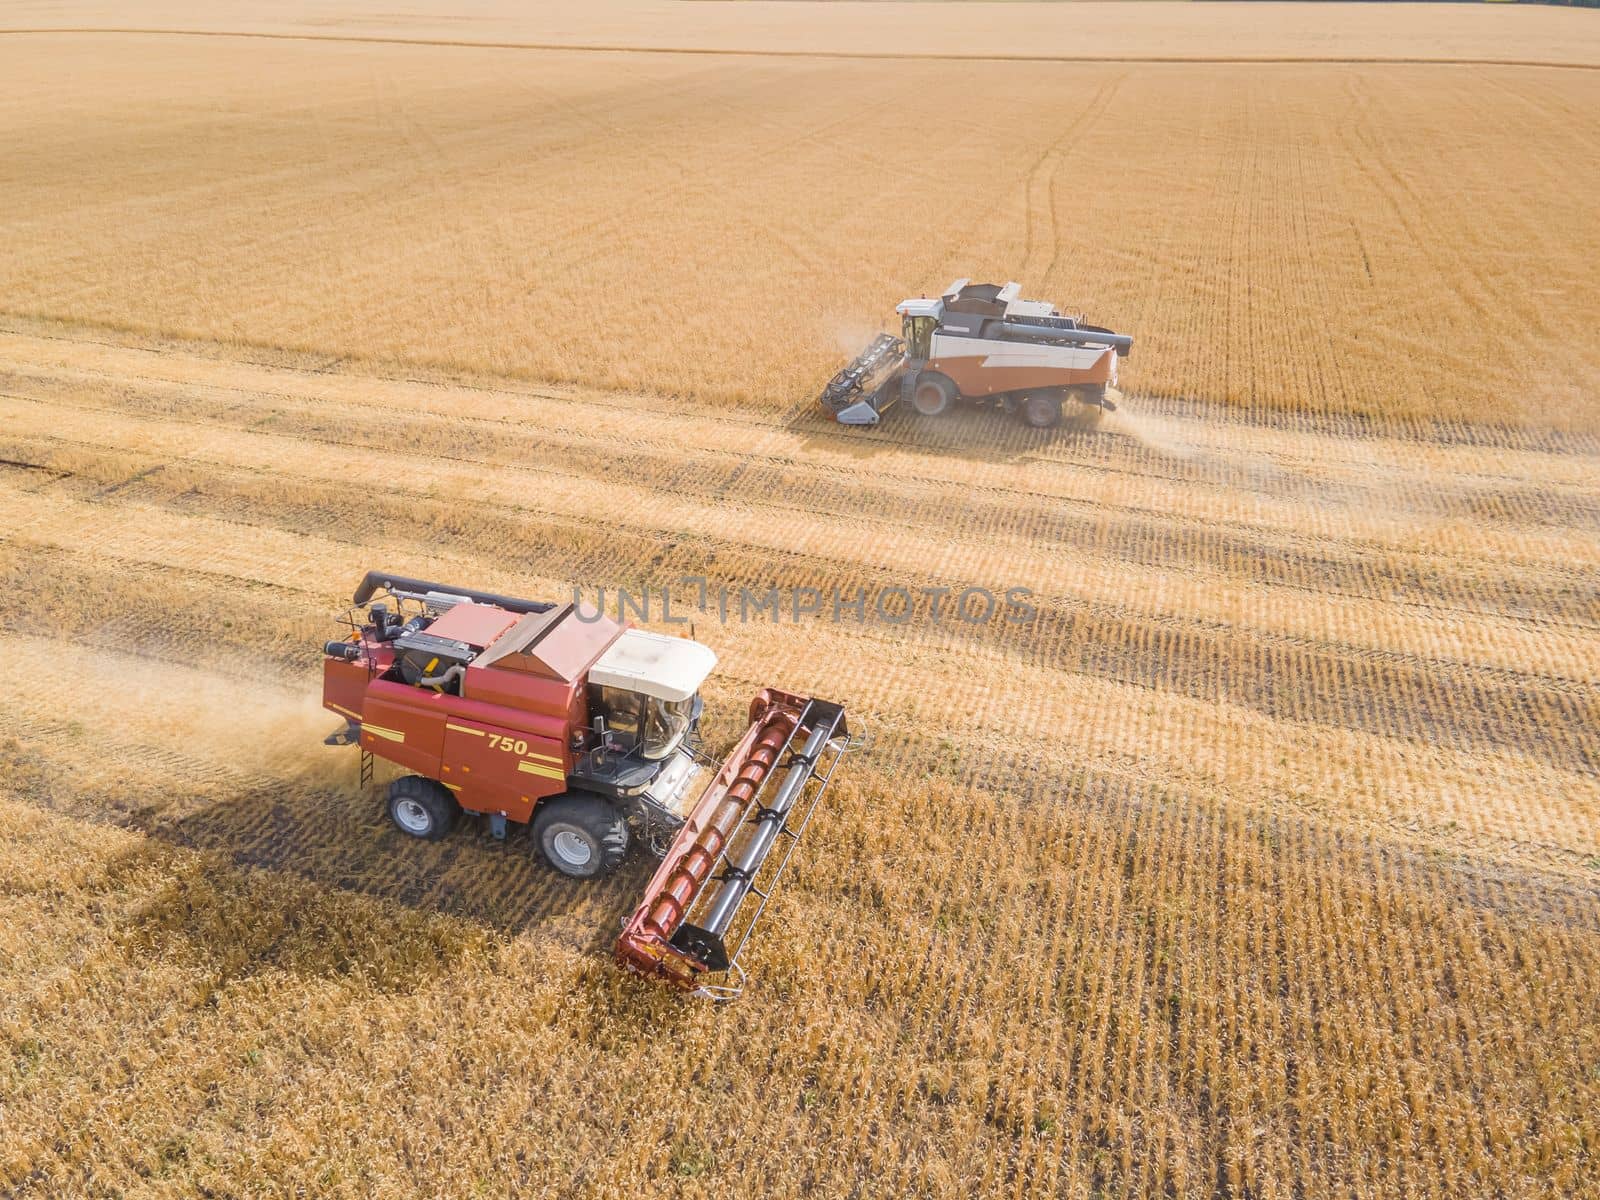 Harvest wheat grain and crop aerial view.Harvesting wheat,oats, barley in fields,ranches and farmlands.Combines mow in the field.Agro-industry.Combine Harvester Cutting on wheat filed.Machine harvest by YevgeniySam